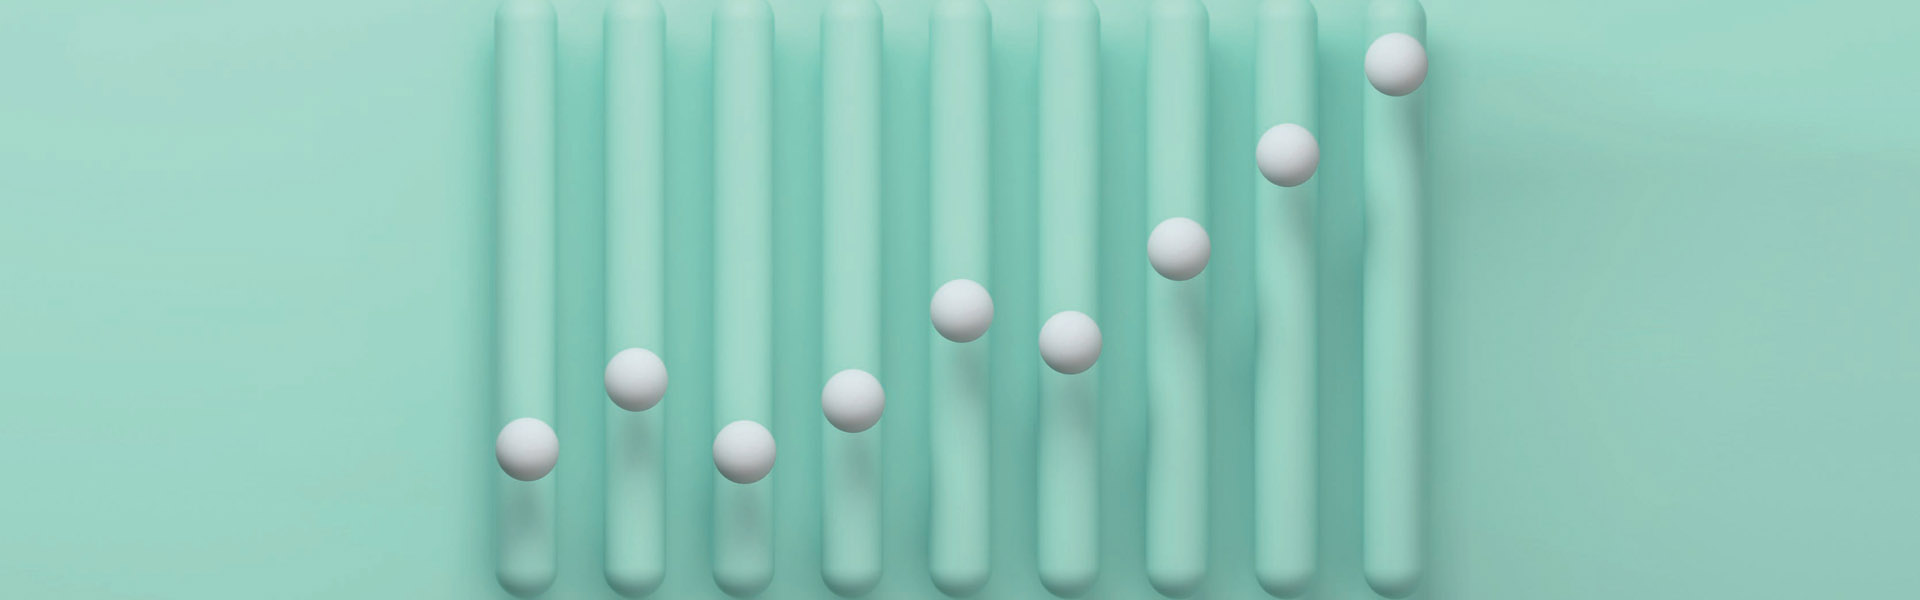 Nine green tubes with a white sphere inside each, floating at various levels to form points on a graph.